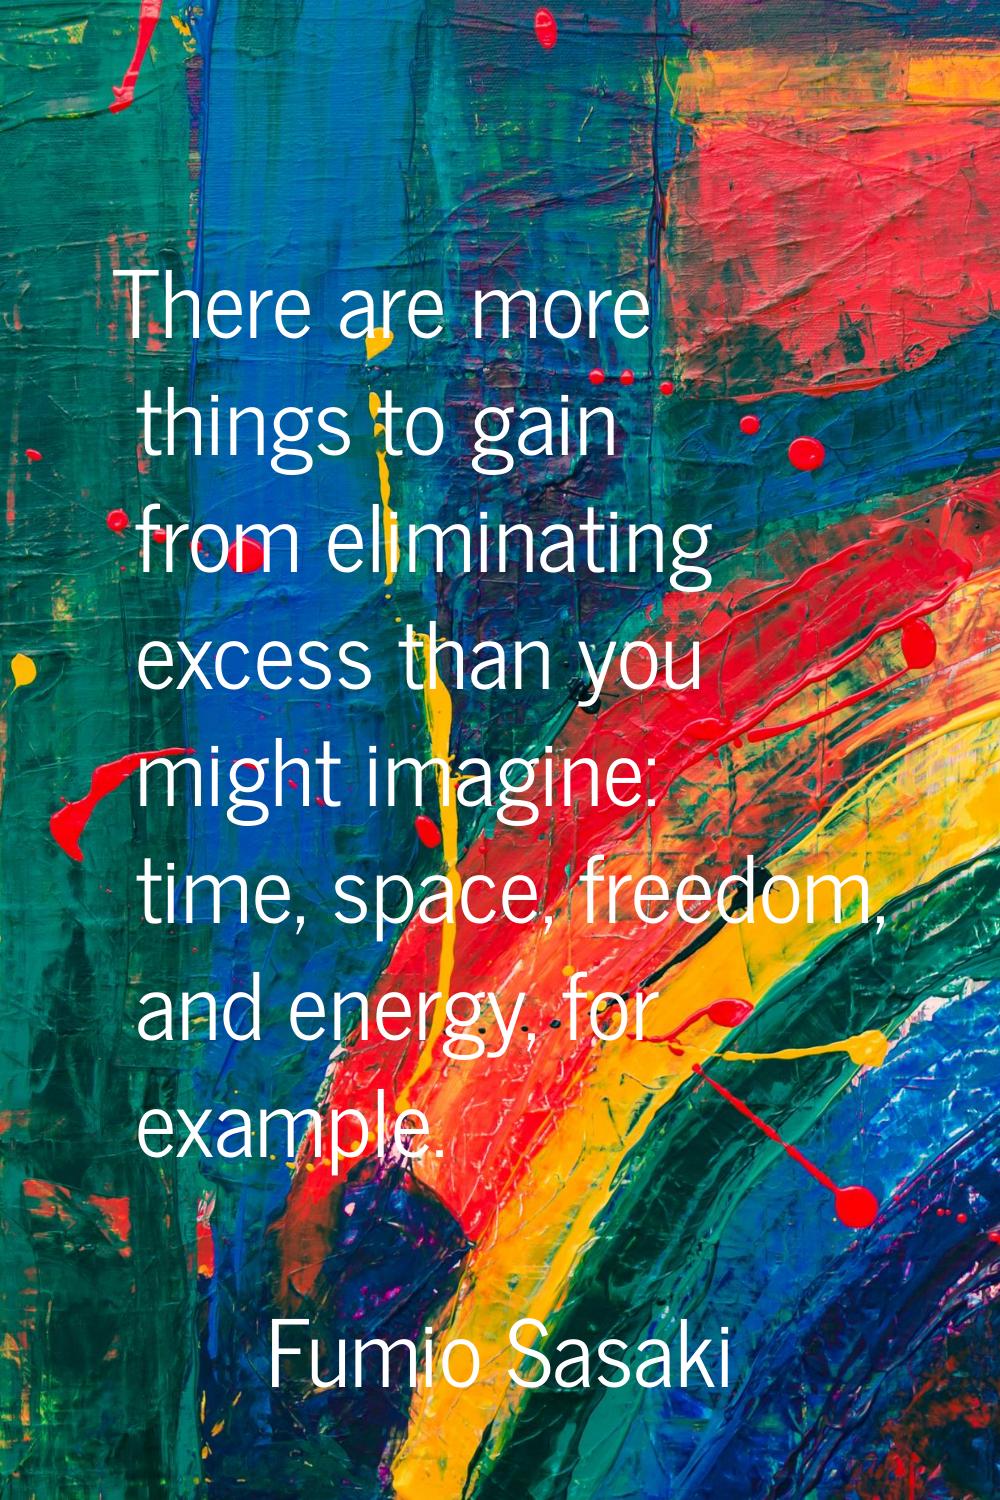 There are more things to gain from eliminating excess than you might imagine: time, space, freedom,